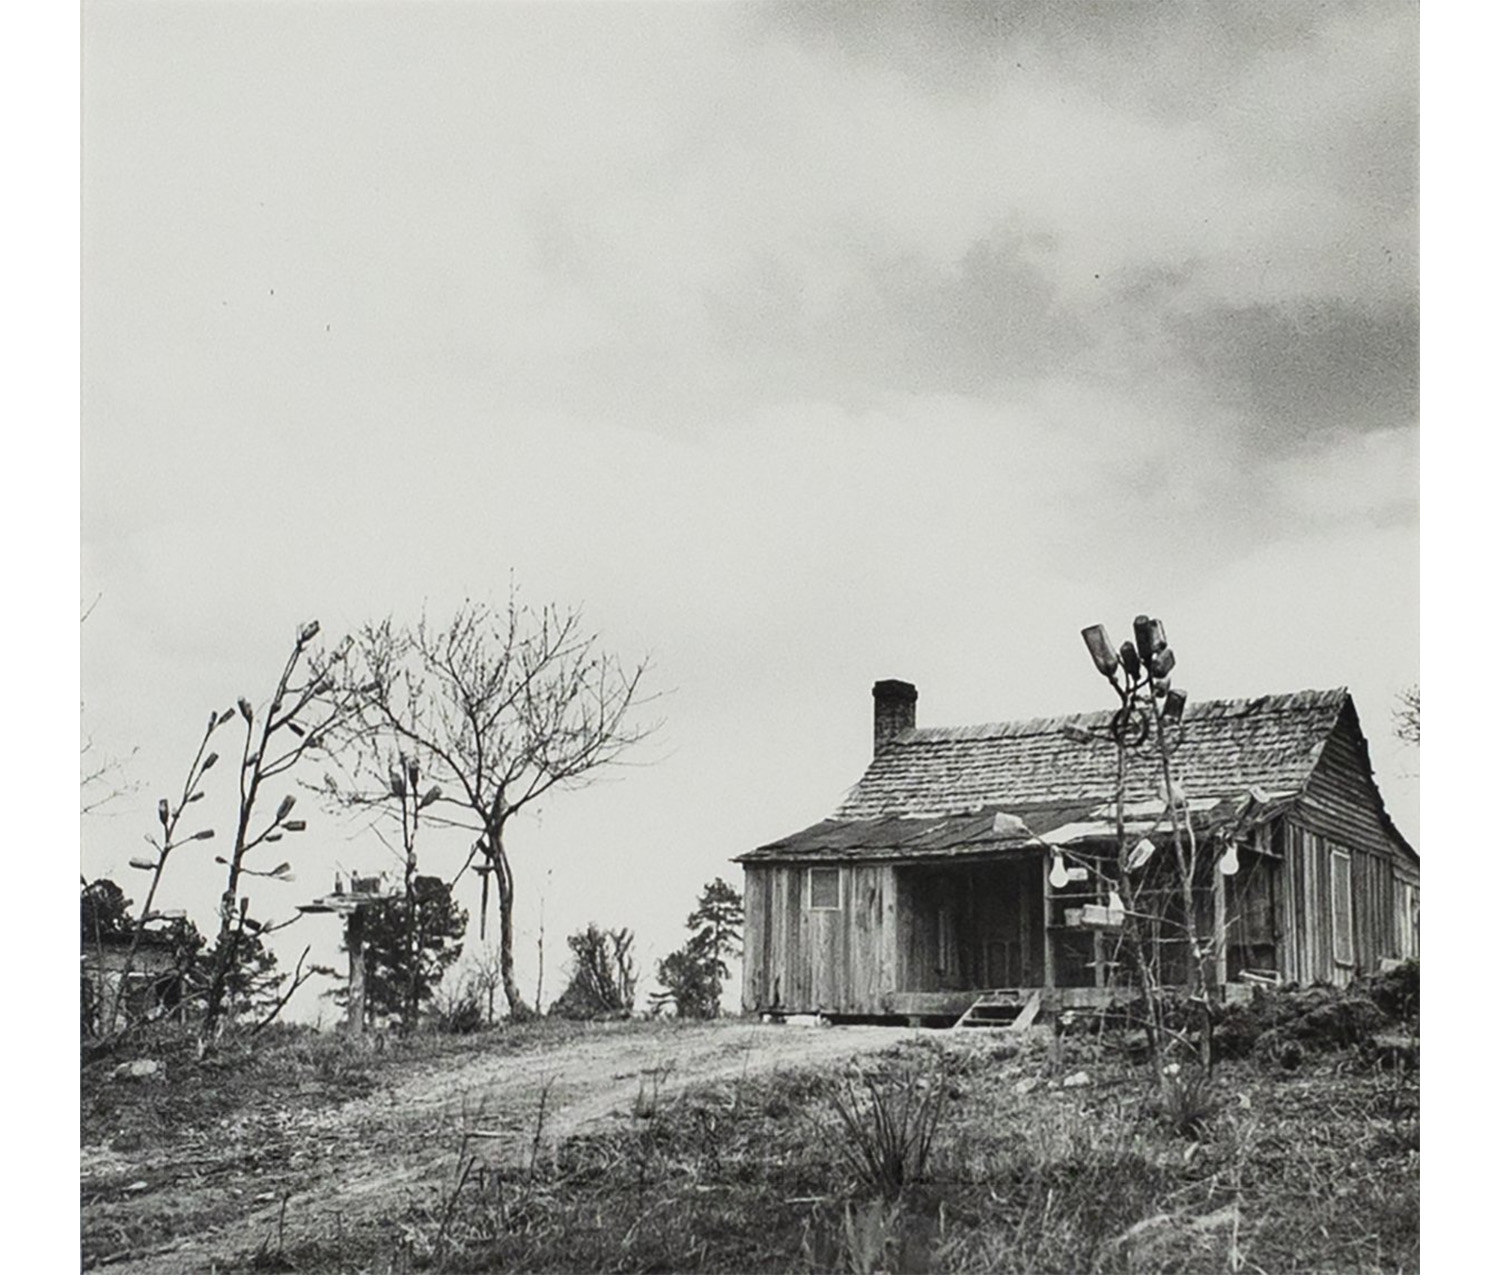 black and white photograph of a house with trees in the yard in front of it, some real trees and some trees constructed out of pieces of metal and branches